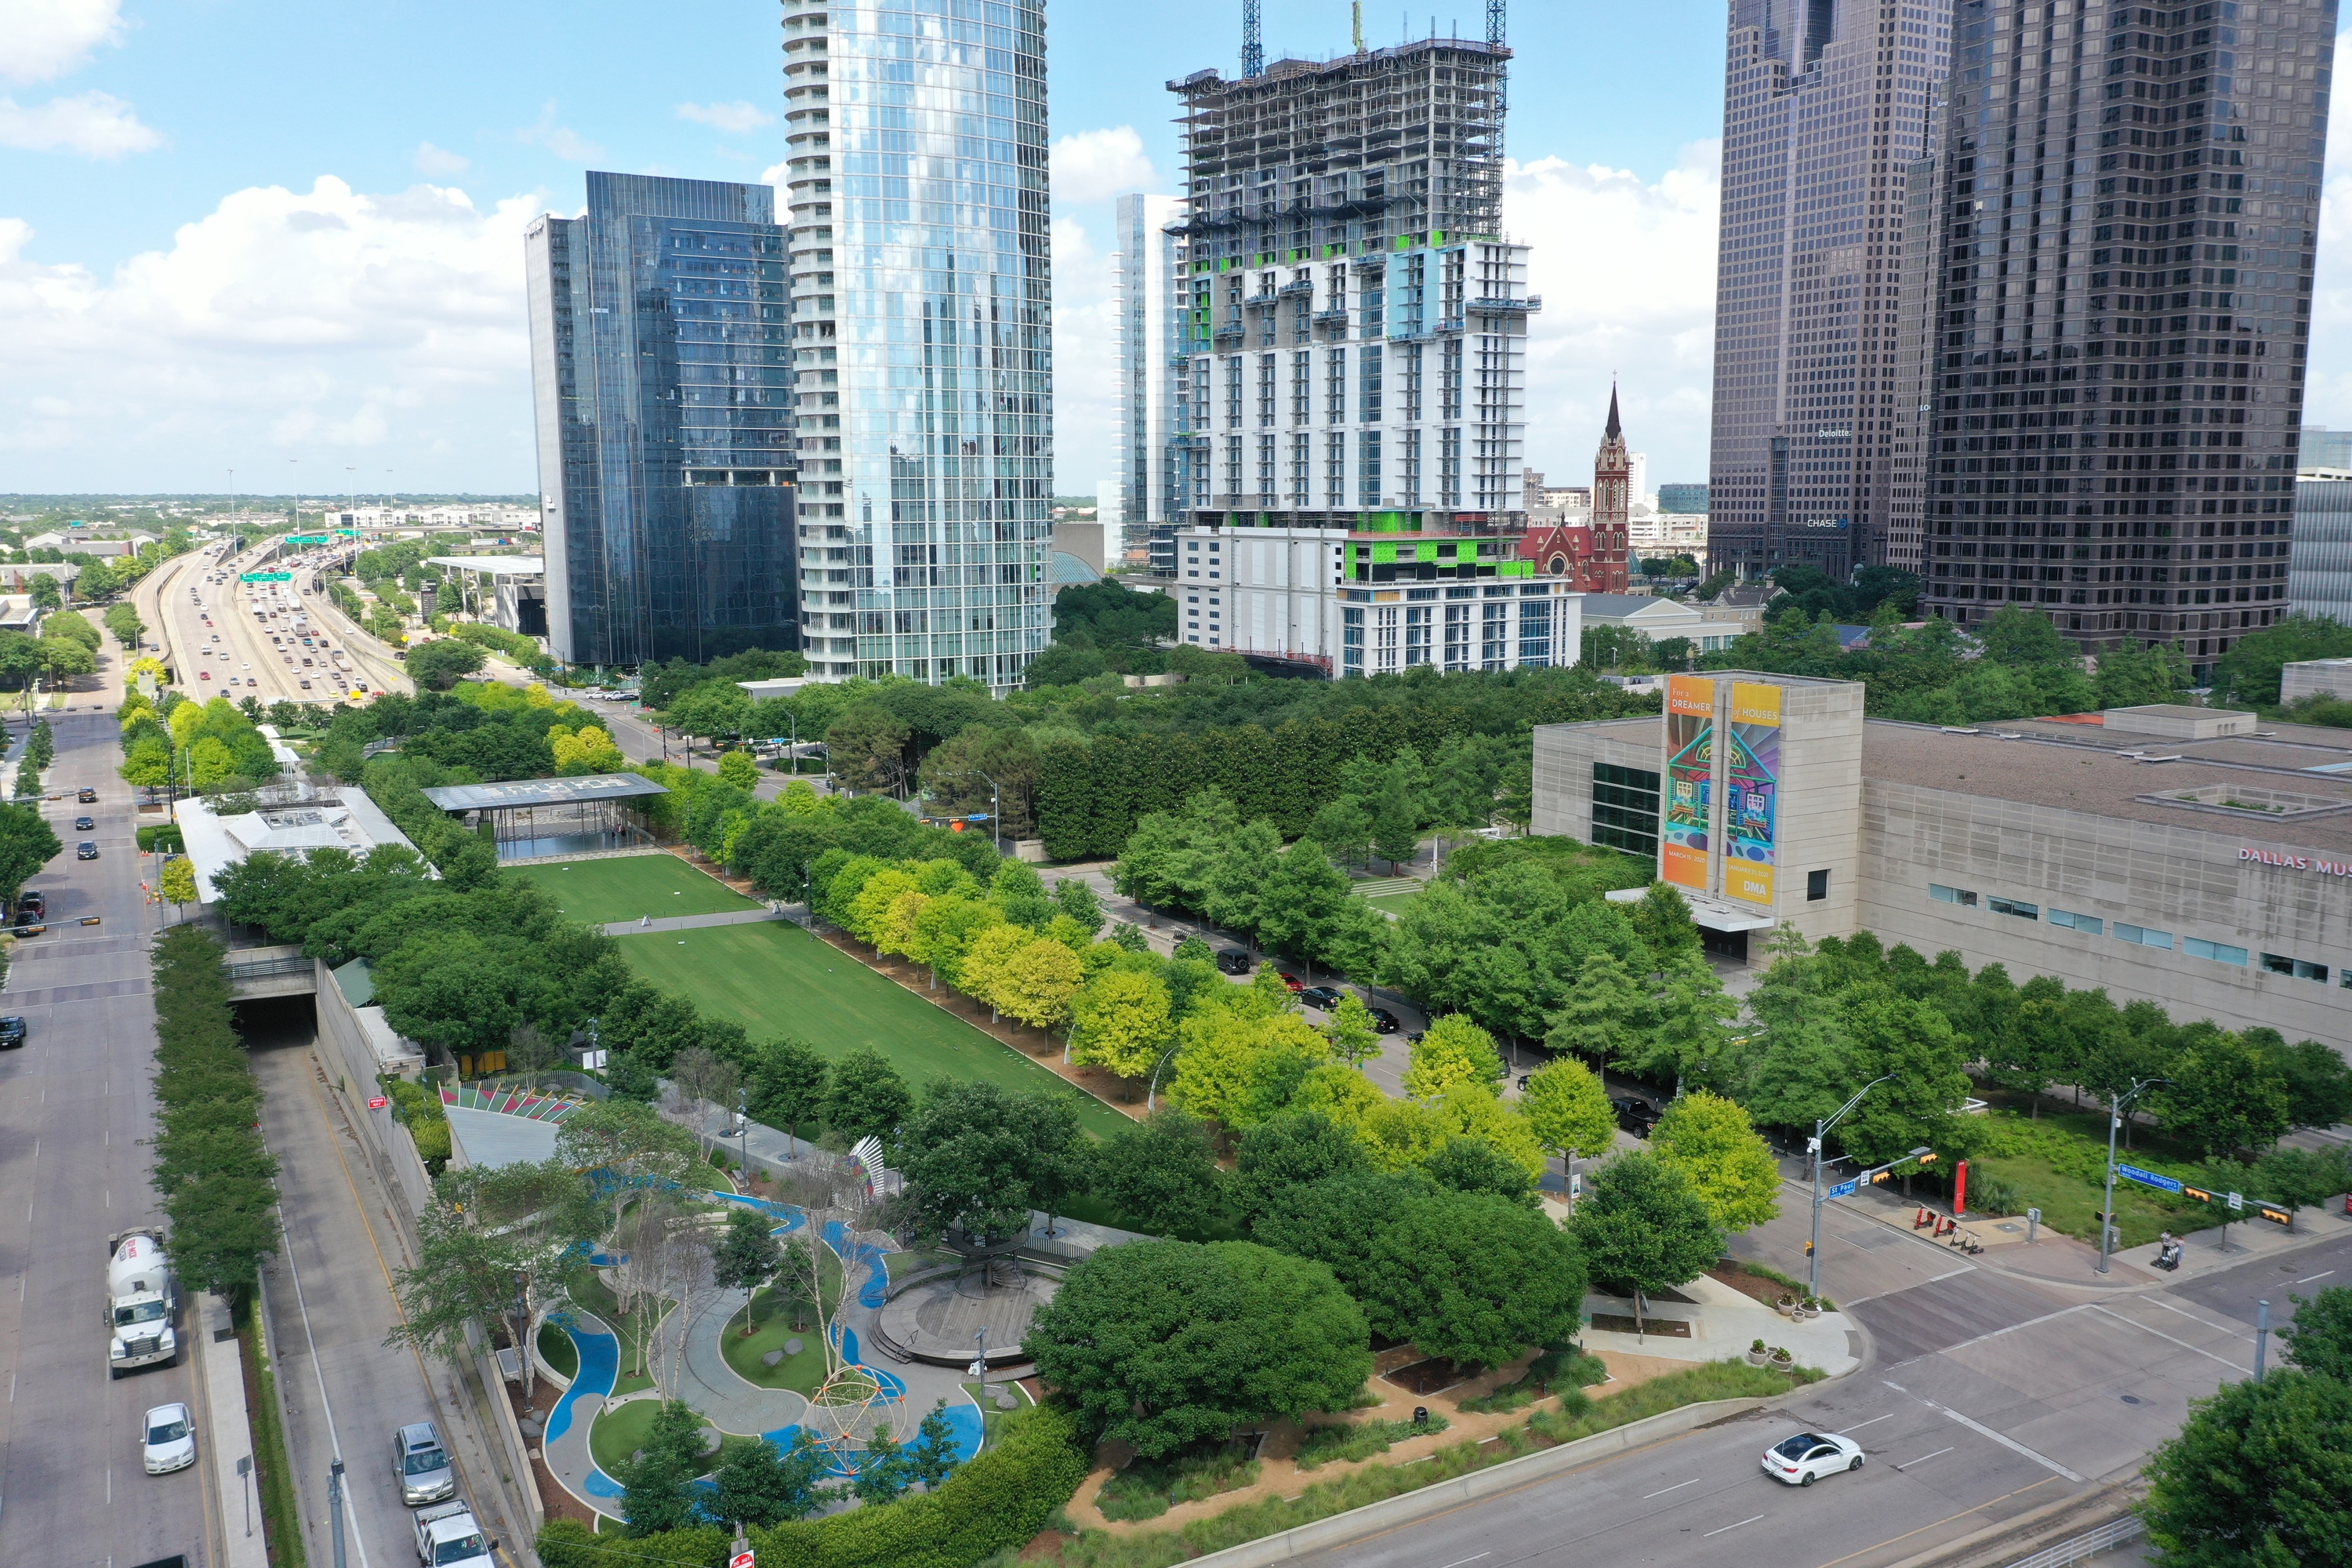 11 Best Parks in Dallas for Refreshing Walks and Beautiful Views